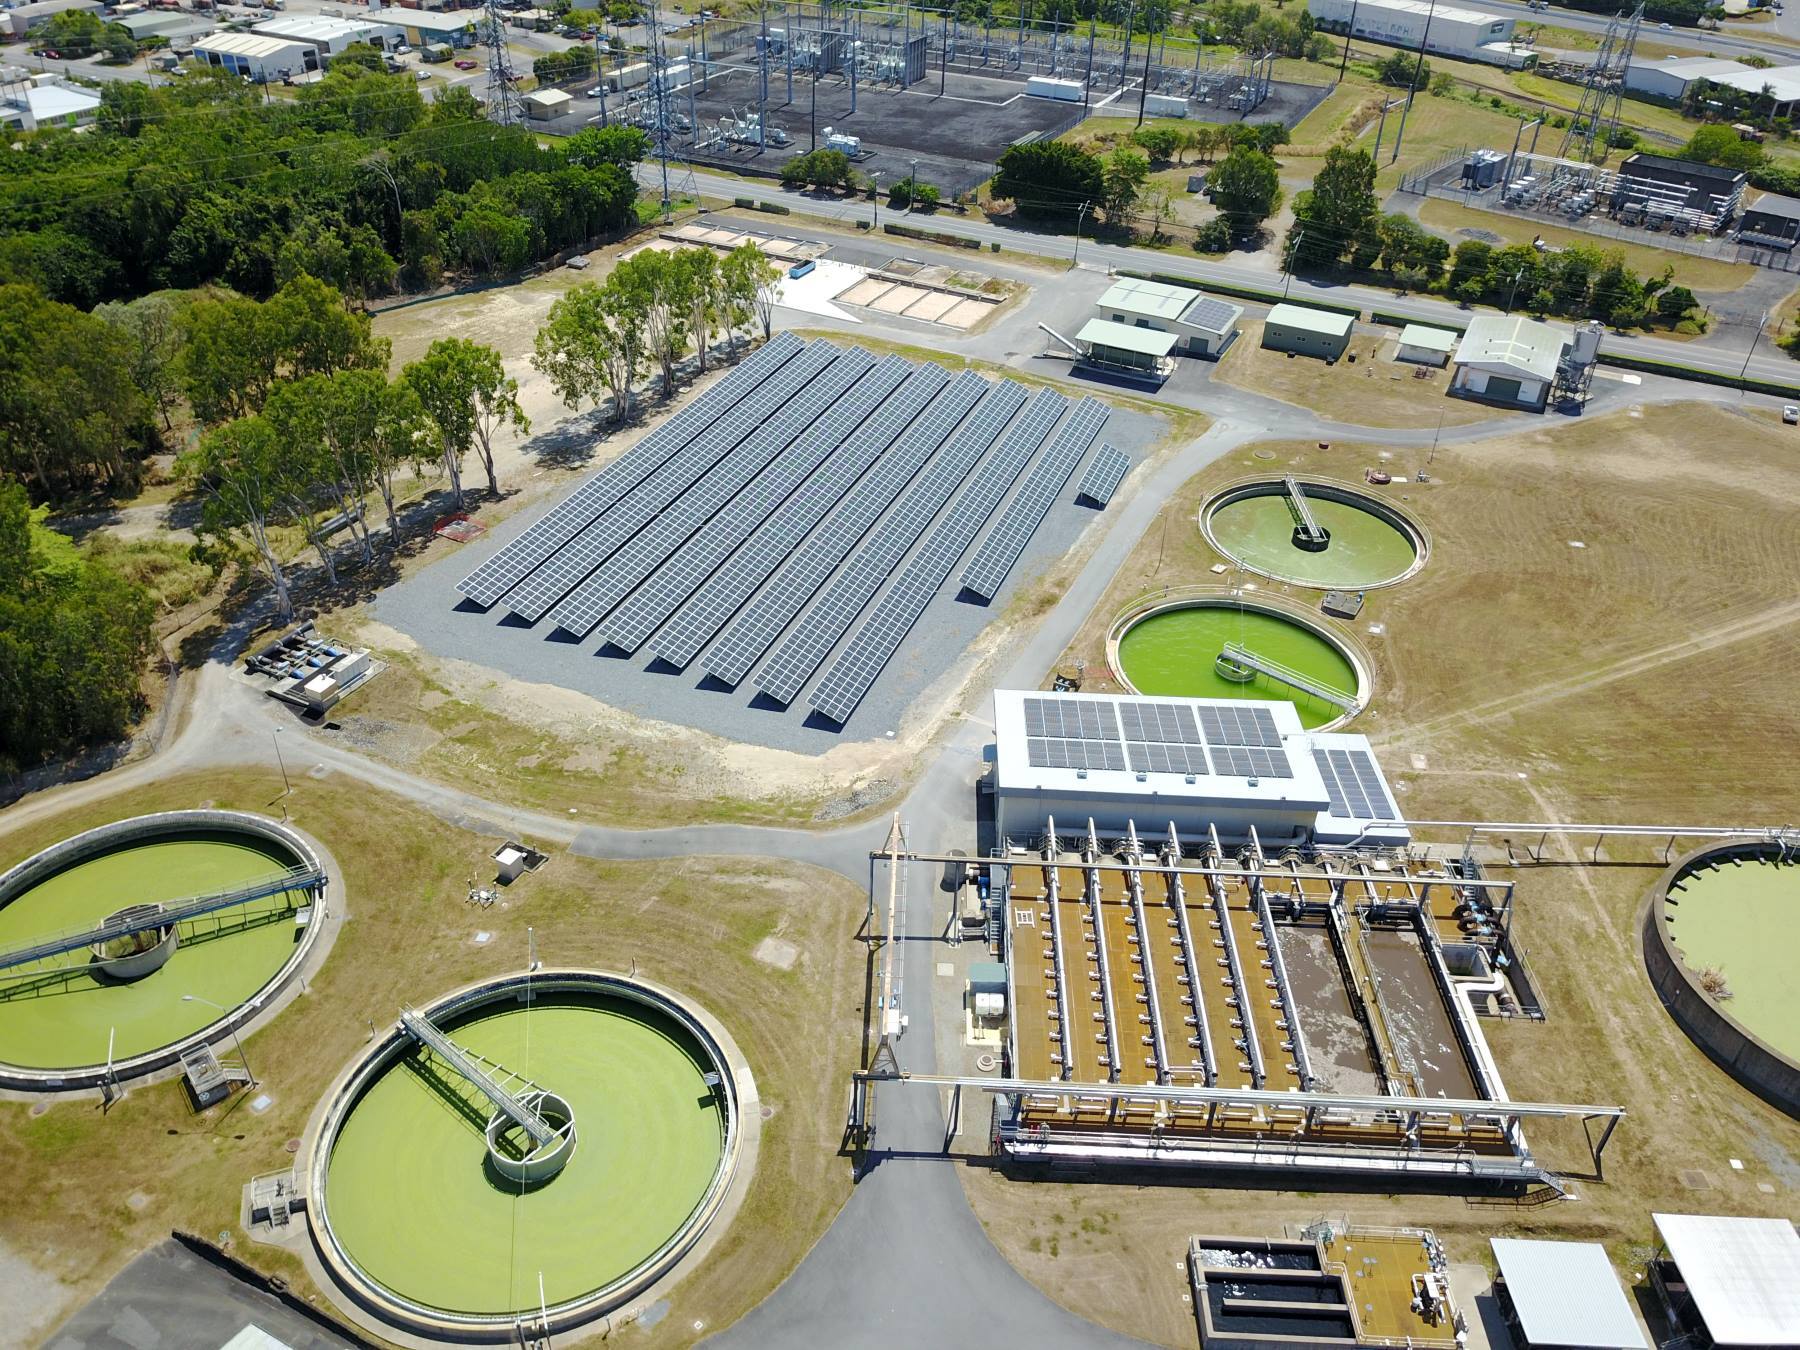 Image shows the 700 kW solar PV installation at Council's Southern Wastewater Treatment Plant